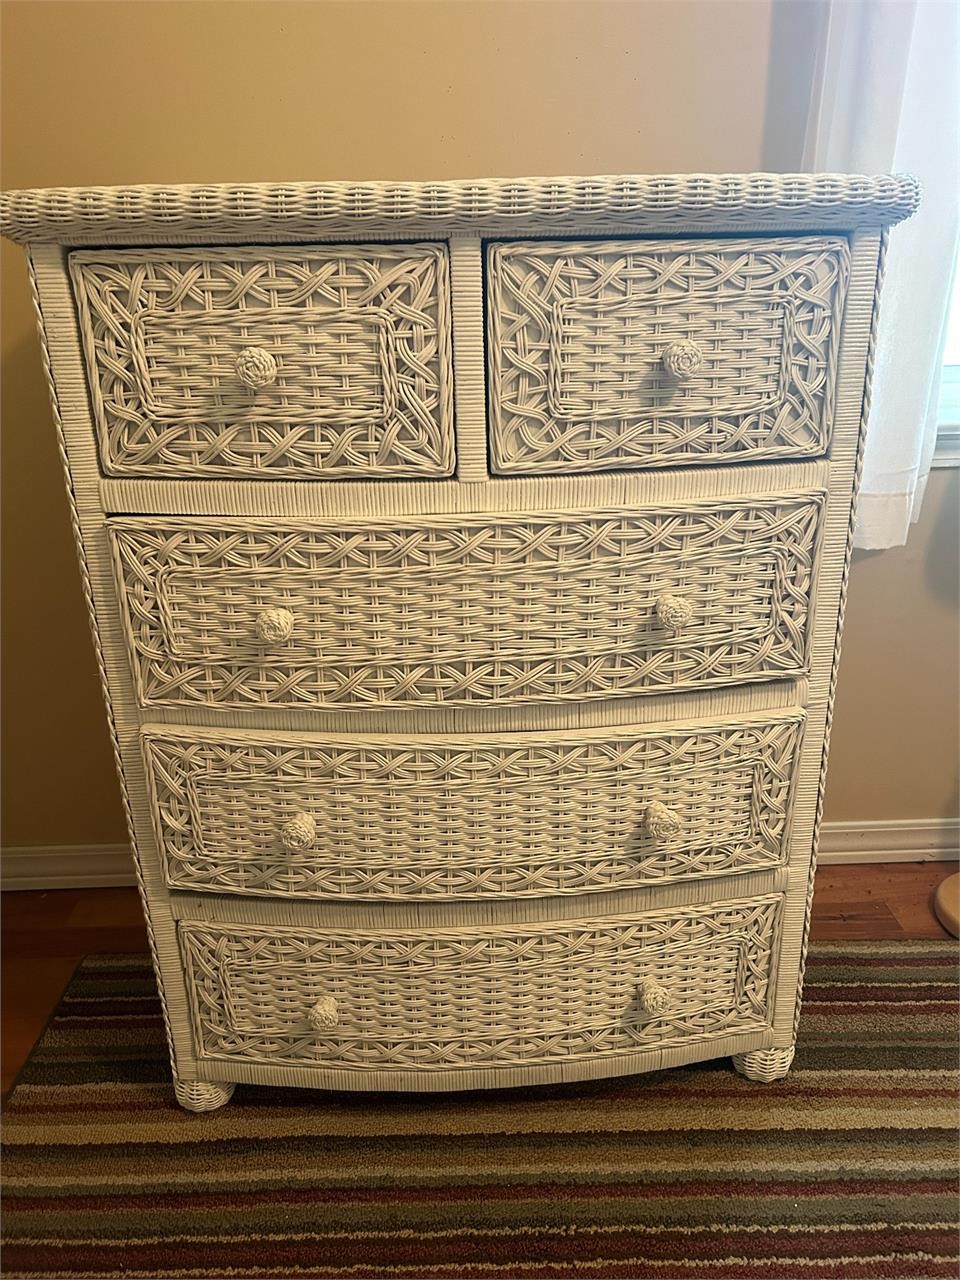 White Wicker Dresser With (5) Drawers